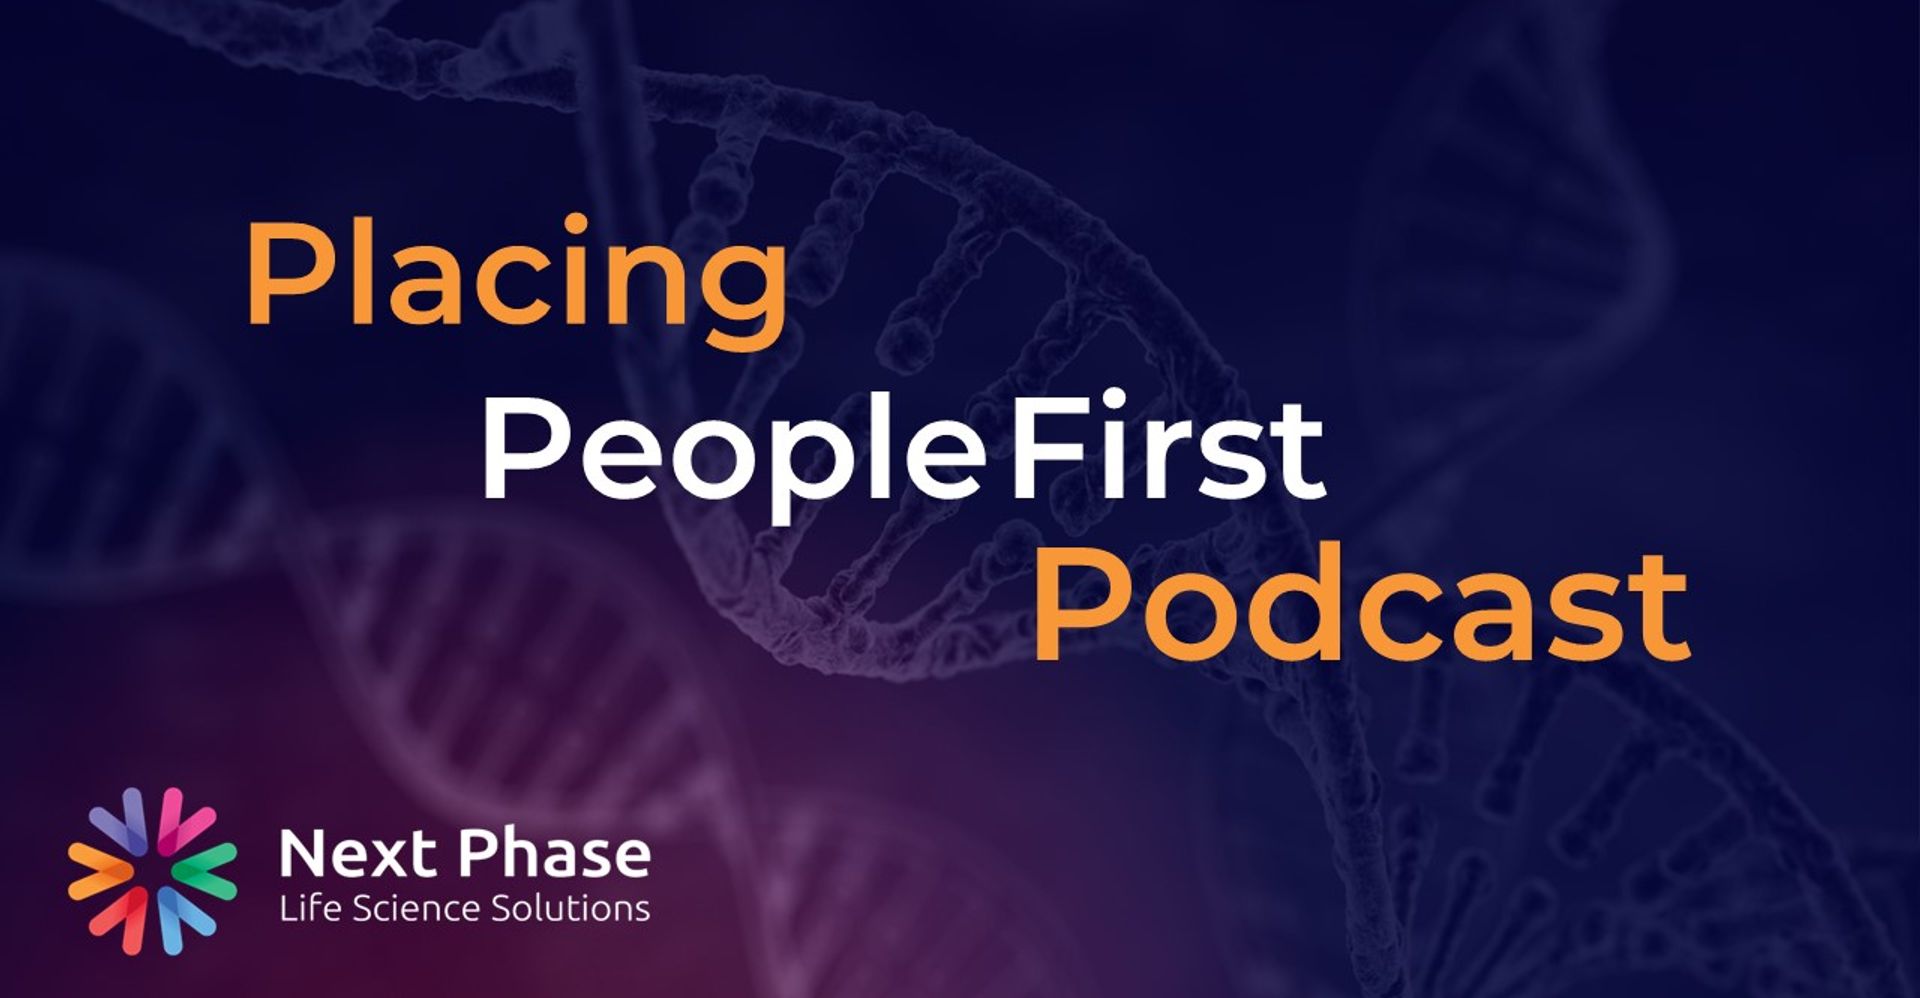 Placing People First Podcast - a podcast available on Spotify and other streaming services.